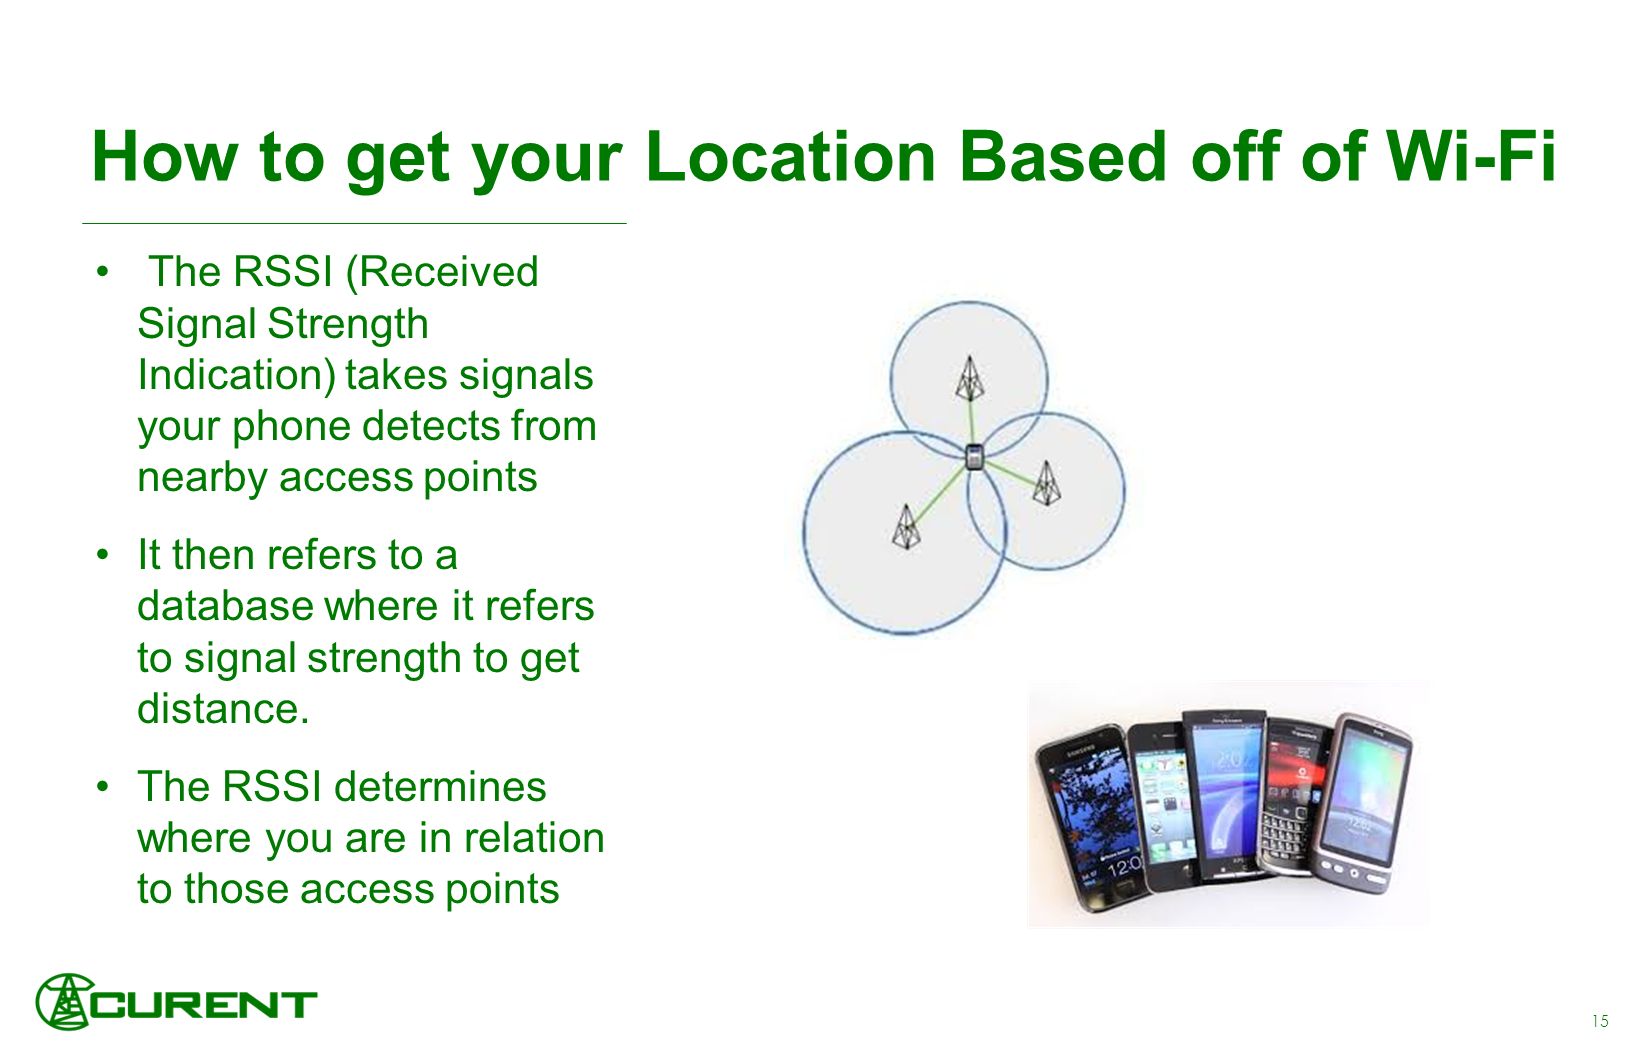 The RSSI (Received Signal Strength Indication) takes signals your phone detects from nearby access points It then refers to a database where it refers to signal strength to get distance.